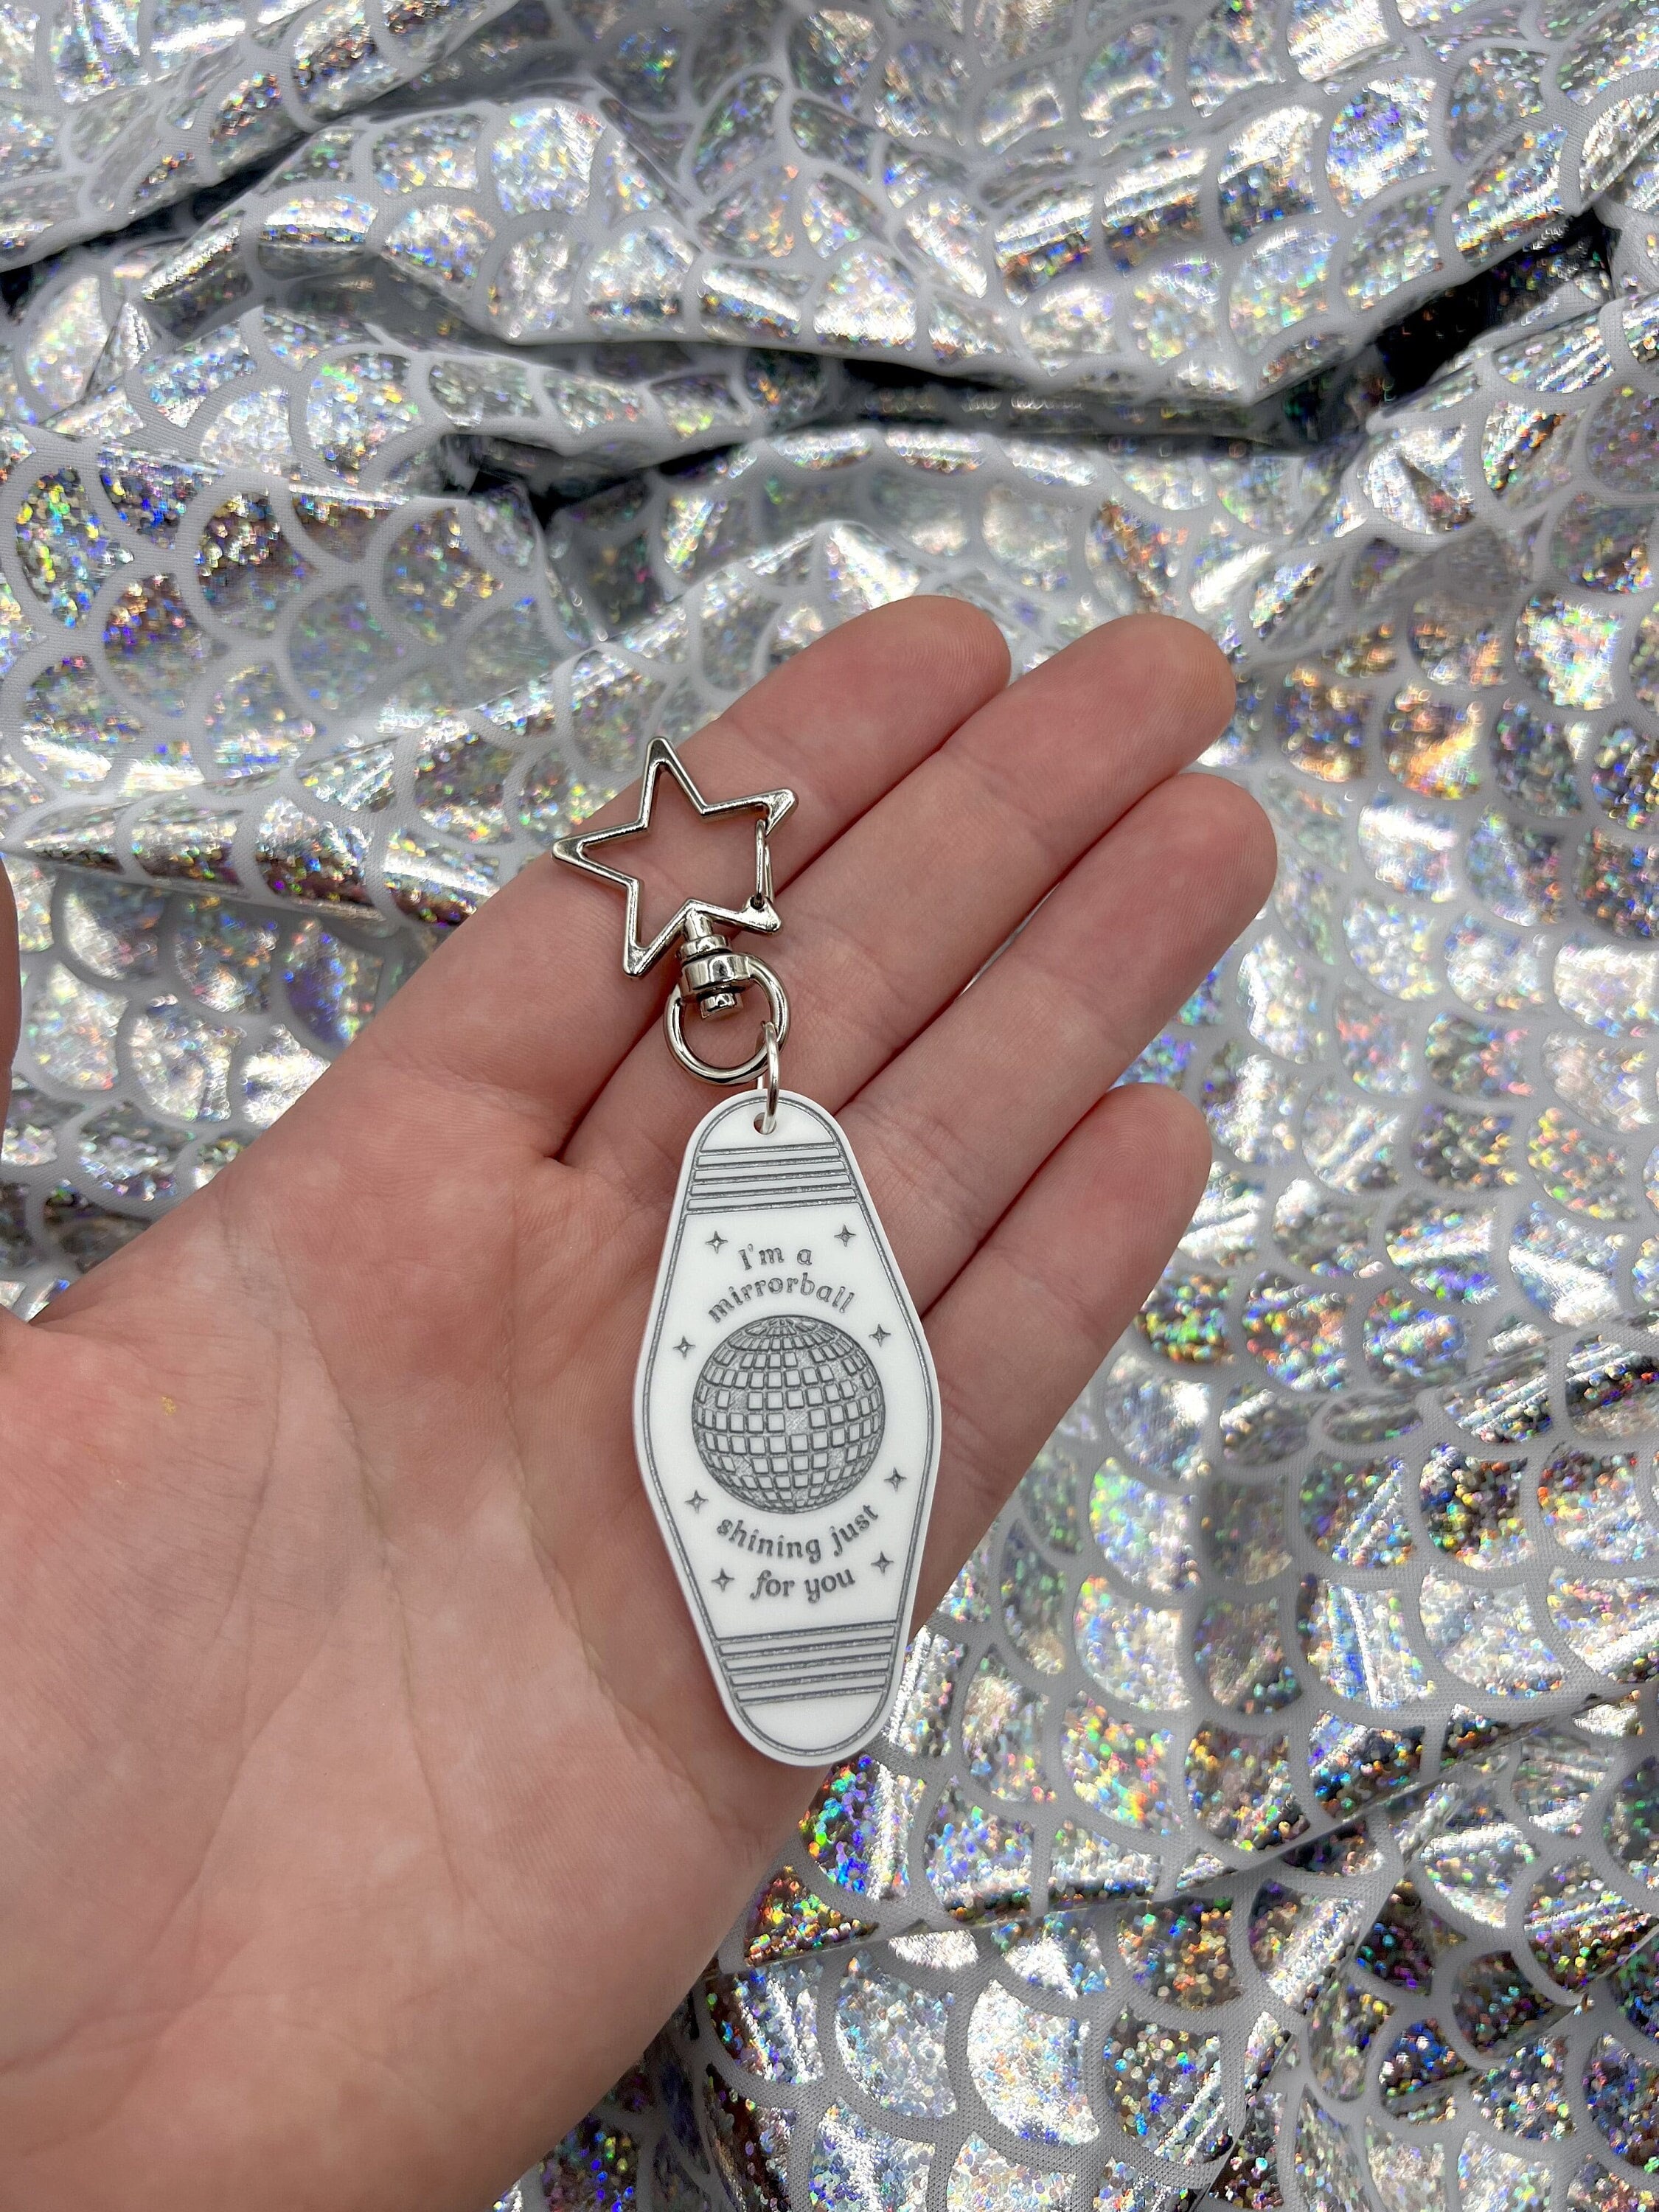 Mirrorball Necklace Taylor Merch Swiftie Outfit Jewelry for Women Teen  Girls TS Mirrorball Pendant Shining Just for You Necklace Music Lover Gifts  Taylor Inspired Gift for Eras Music Fan Gifts, Small, :